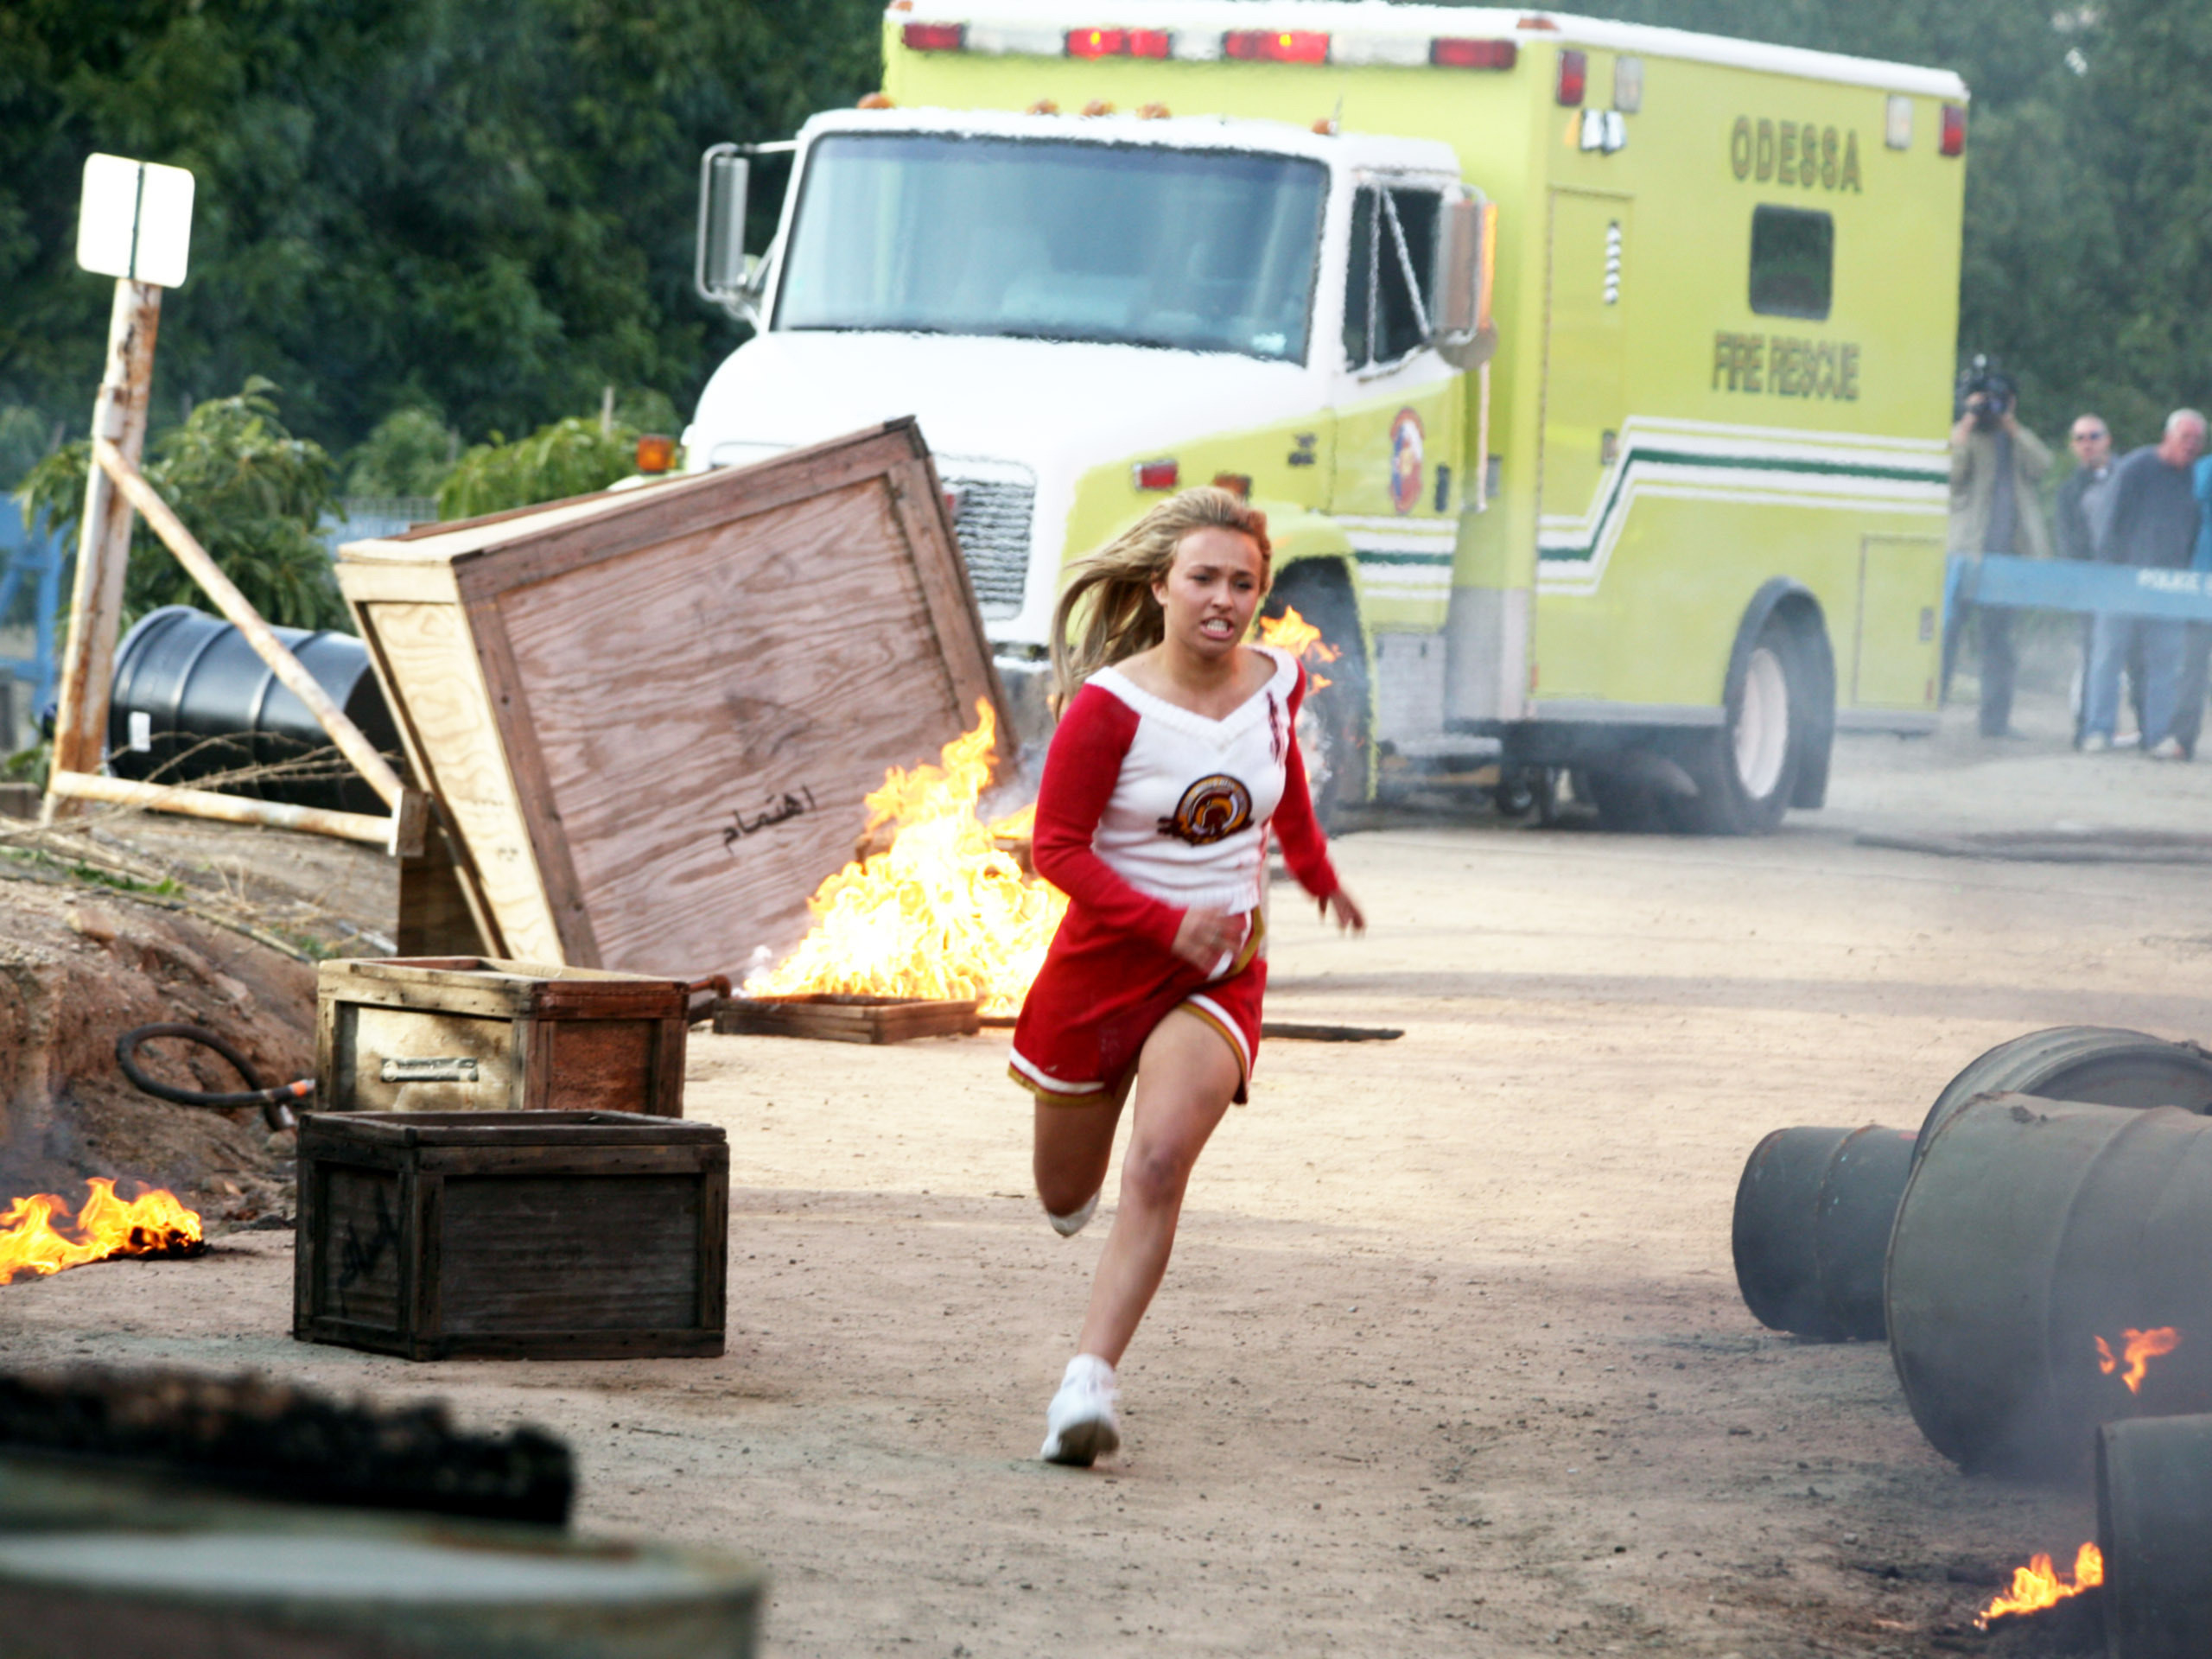 Hayden Panettiere runs away from an ambulance in a cheerleader outfit